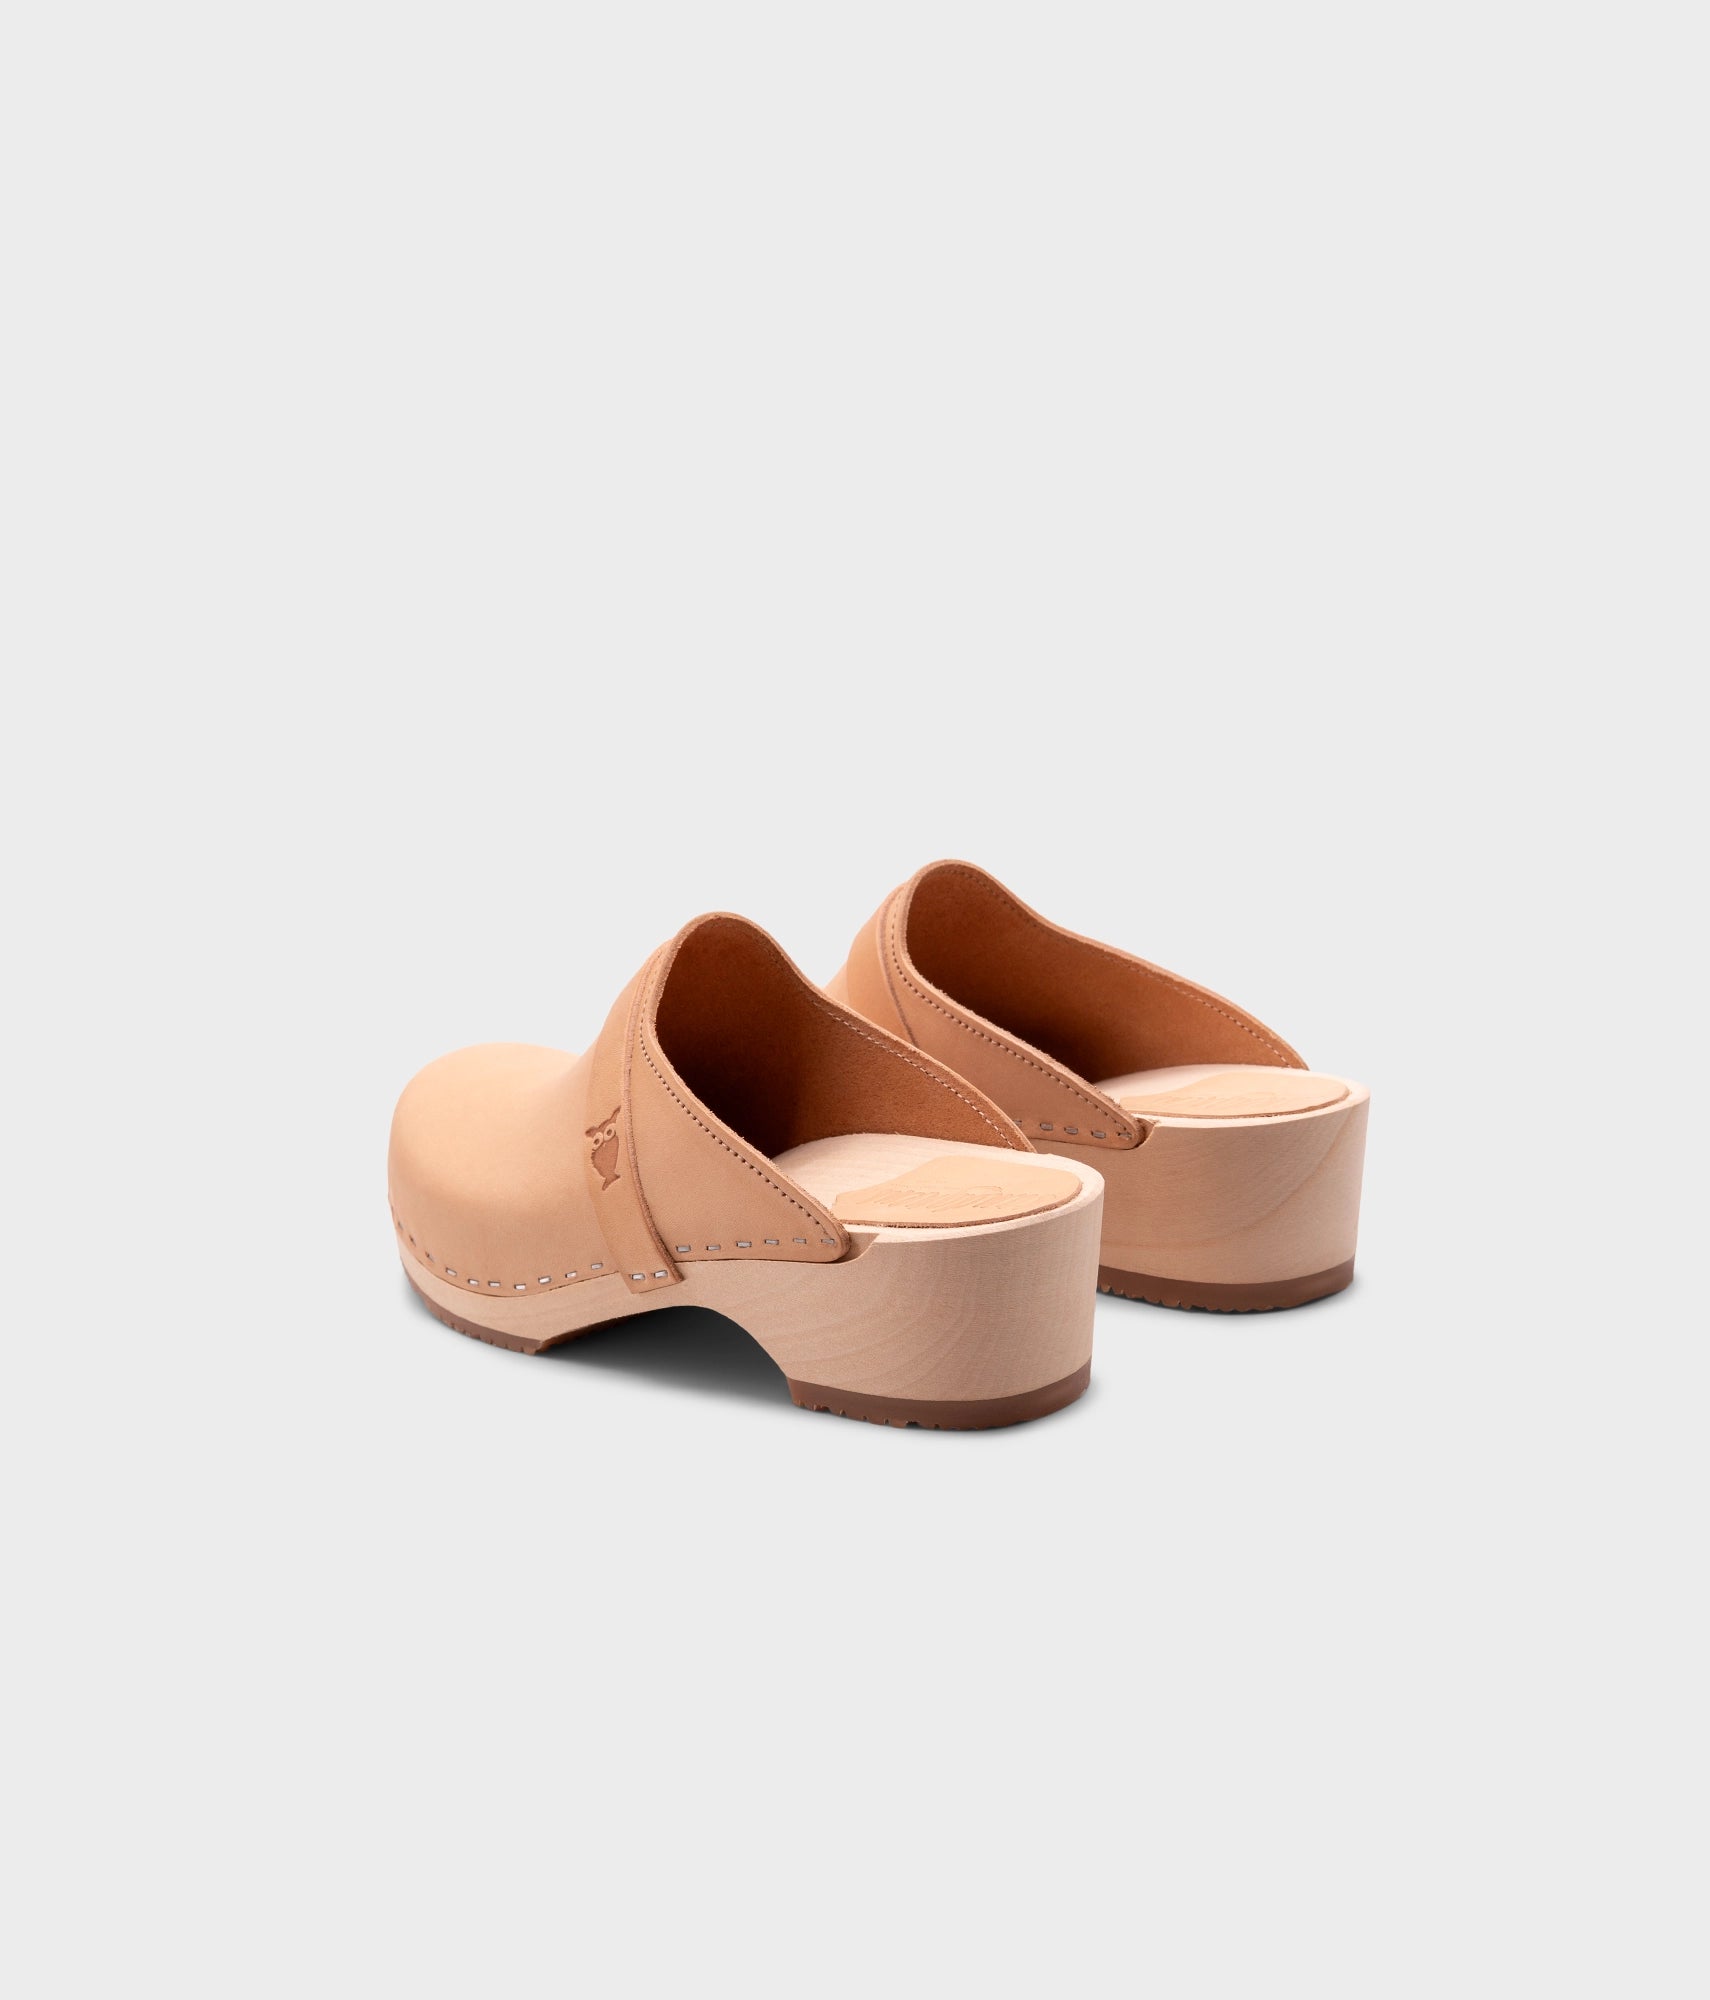 classic low heeled clog mule in beige ecru vegetable tanned leather stapled on a light wooden base with a leather strap